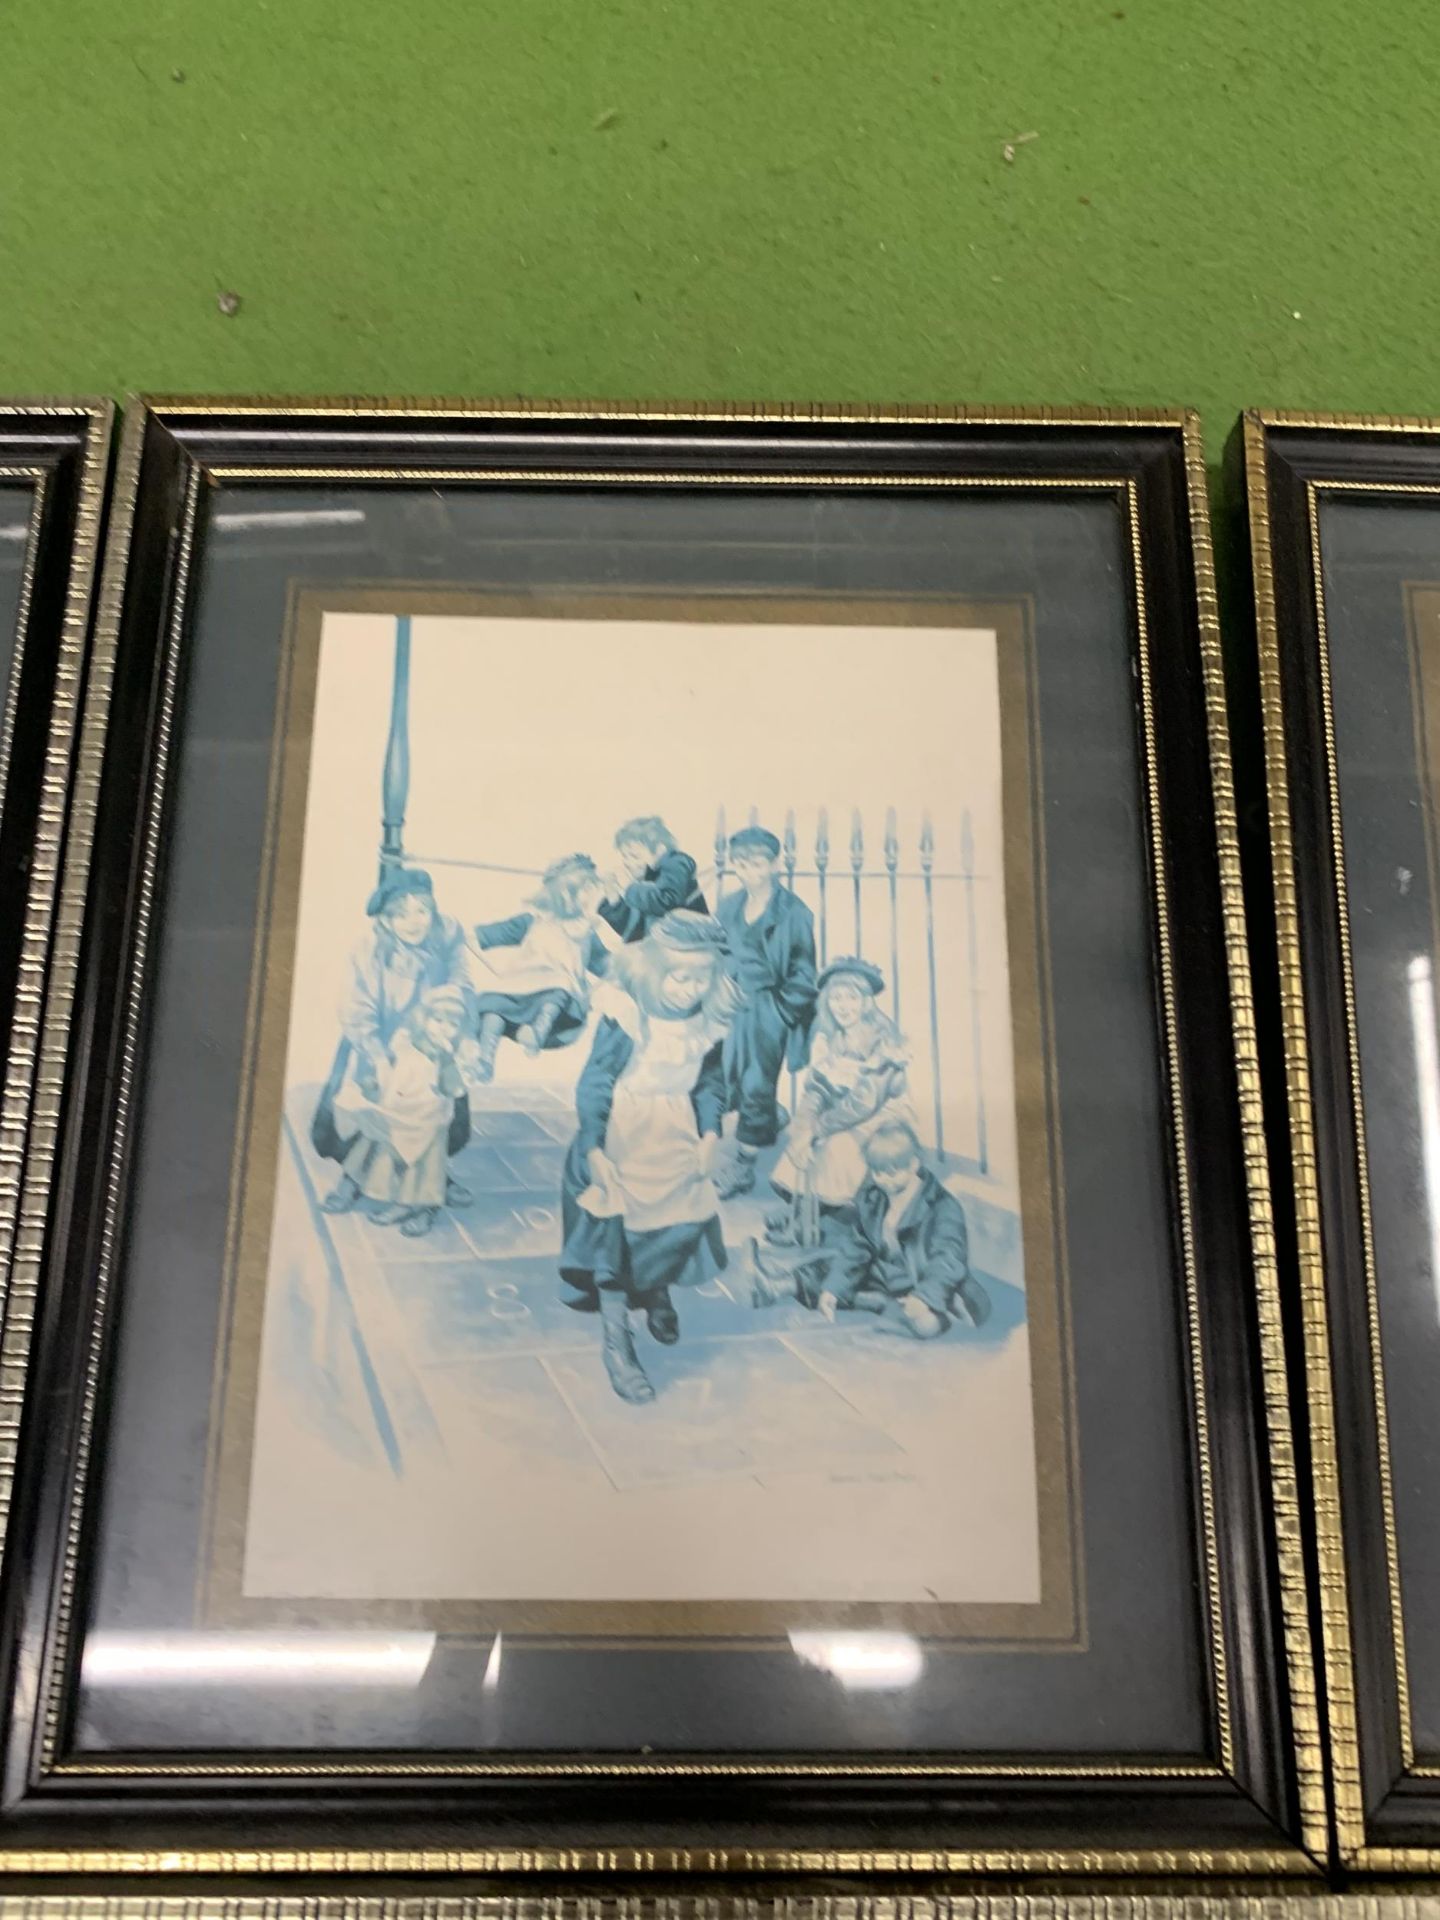 FOUR FRAMED PRINTS BY GERALD EMBLETON DEPICTING VICTORIAN PLAYGROUND DAYS - Image 4 of 5